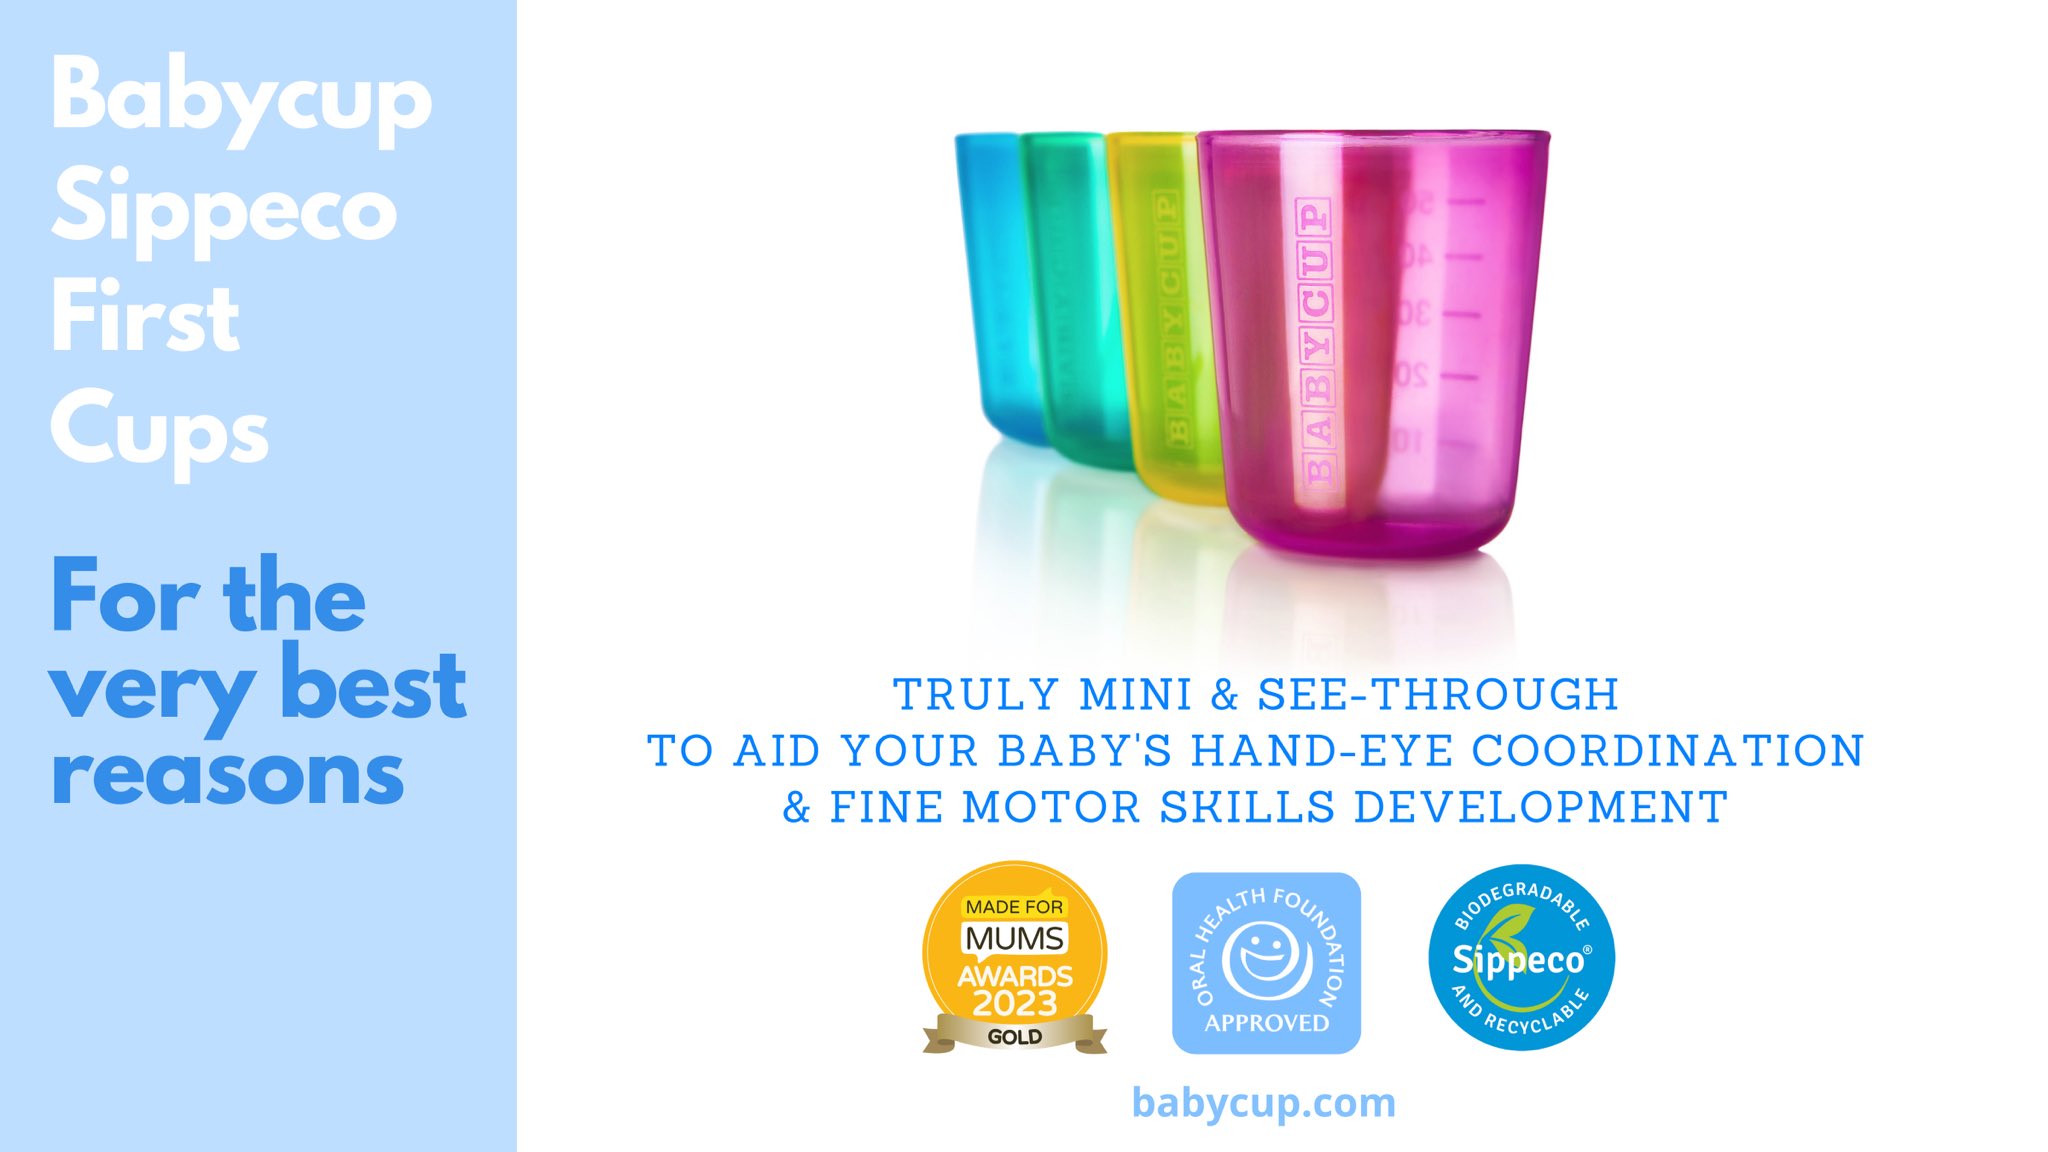 Baby cups from Babycup - Oral Health Foundation approved